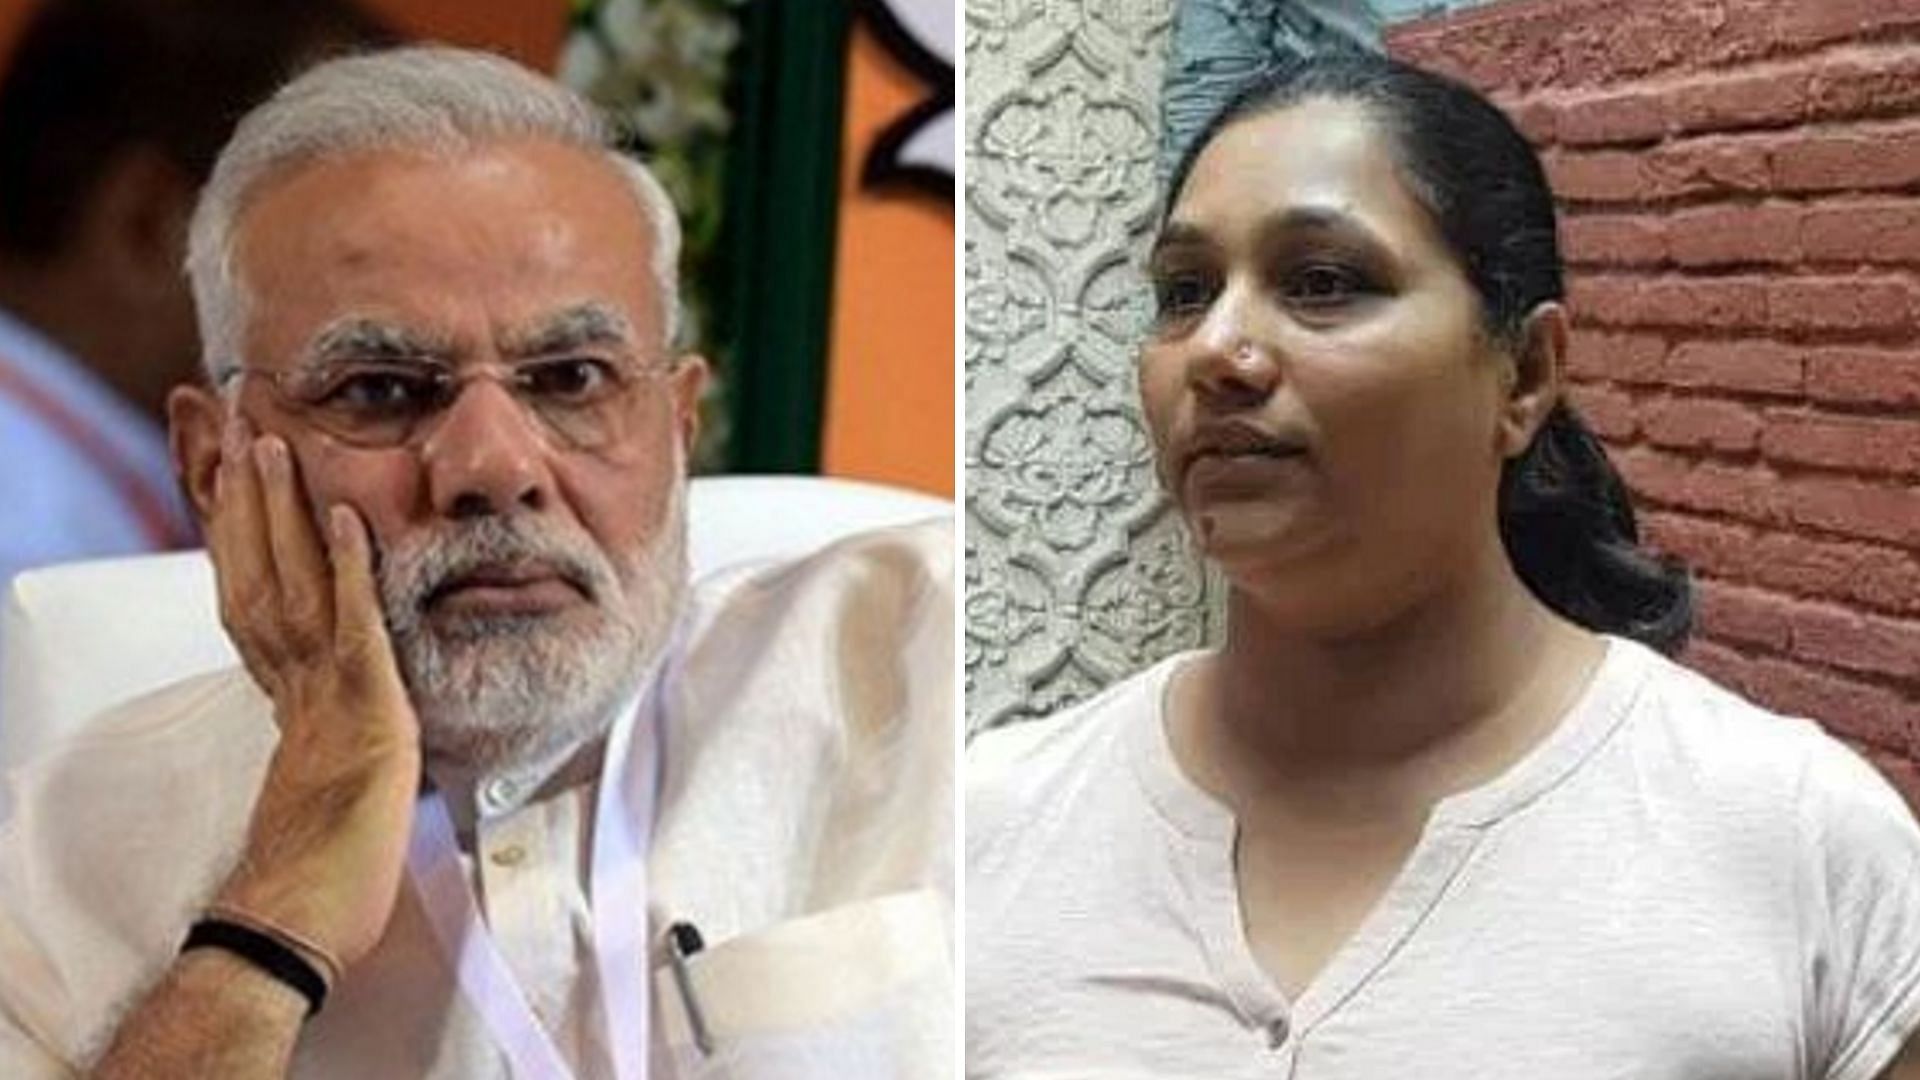 Prime Minister Narendra Modi’s niece has become the latest victim of snatching in the national capital.